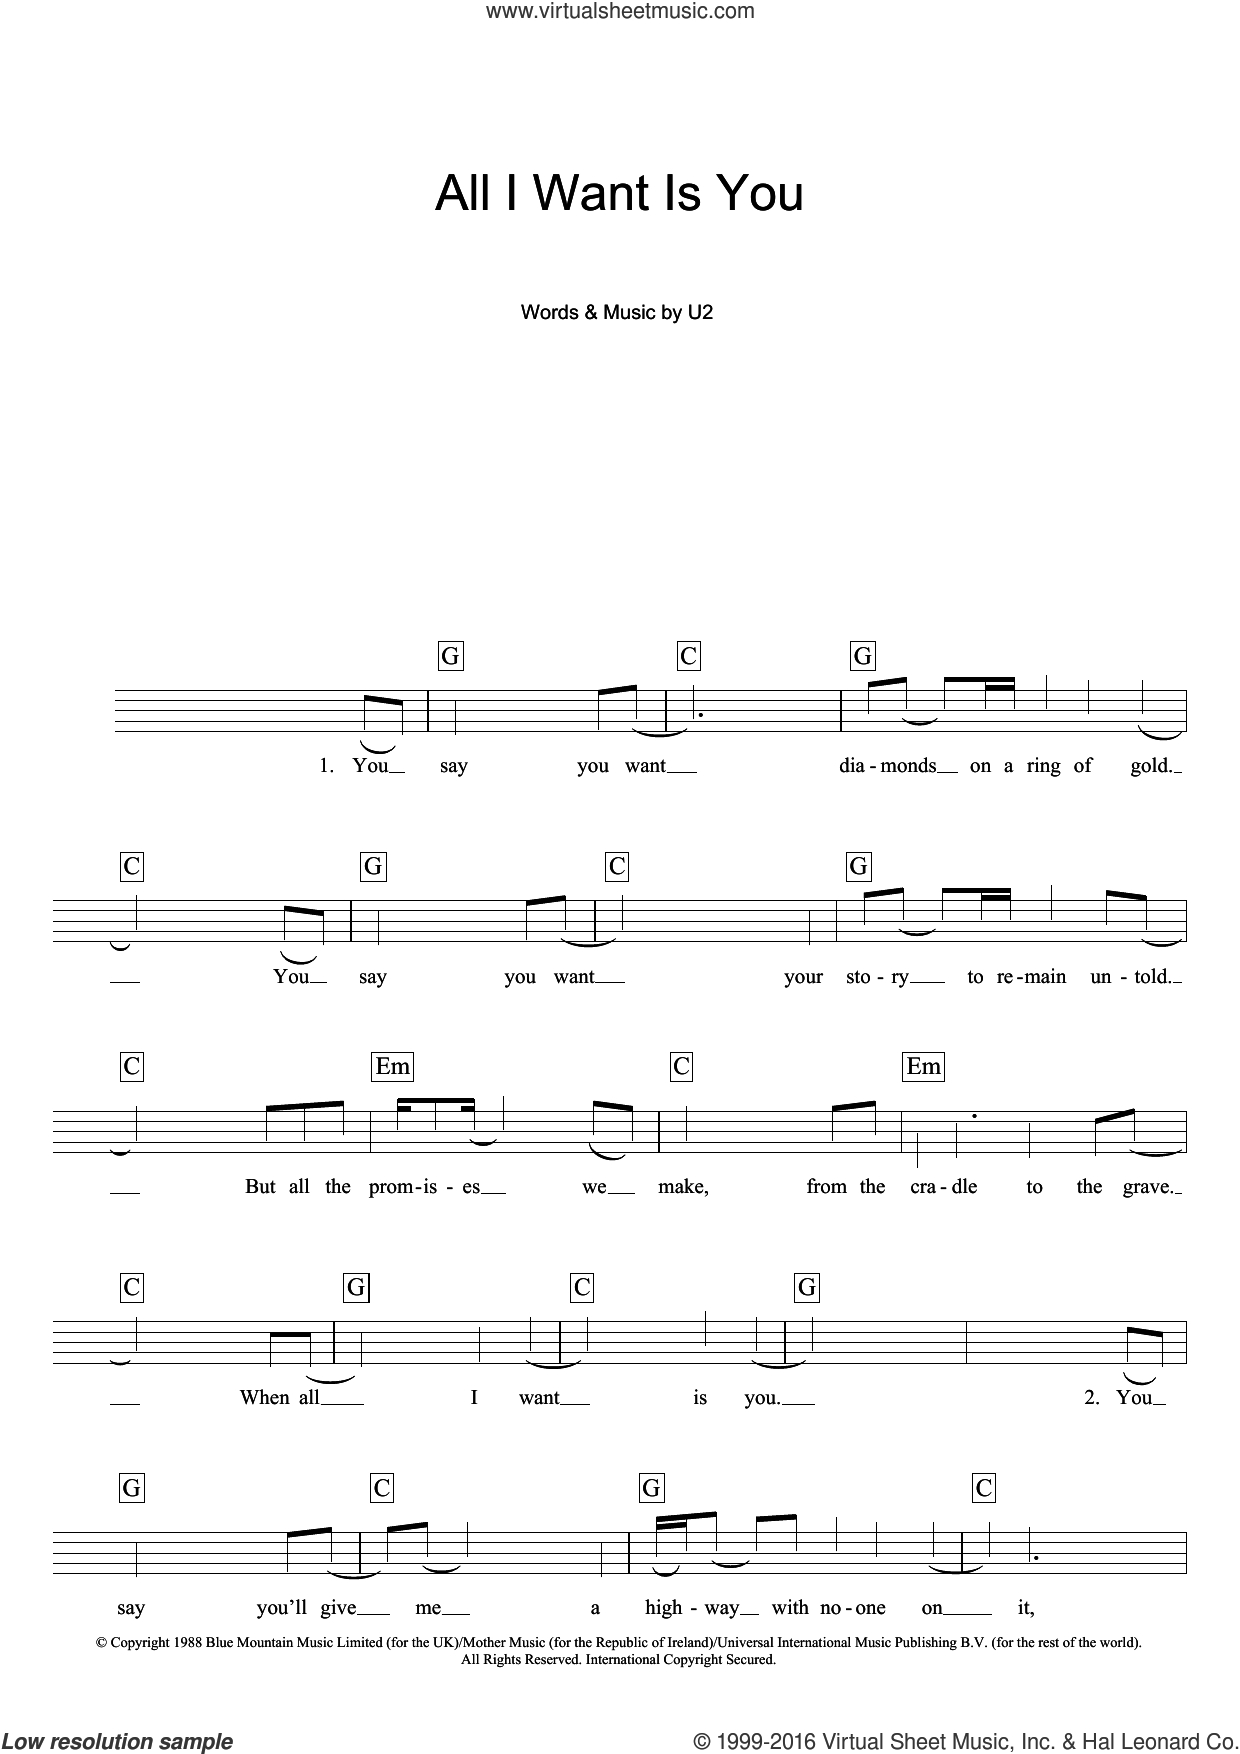 All I Want Chords U2 All I Want Is You Sheet Music For Piano Solo Chords Lyrics Melody